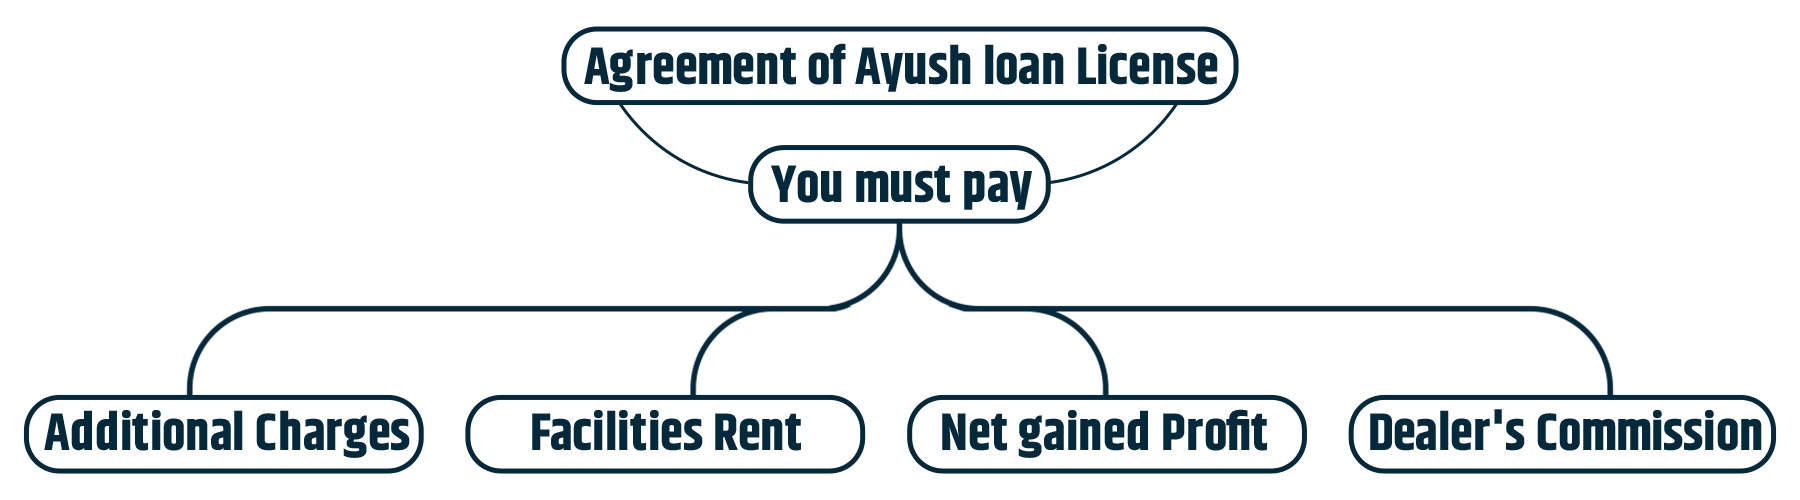 as per the agreement of ayush loan license, you have to pay additional charges, rent, profit, dealer's commision